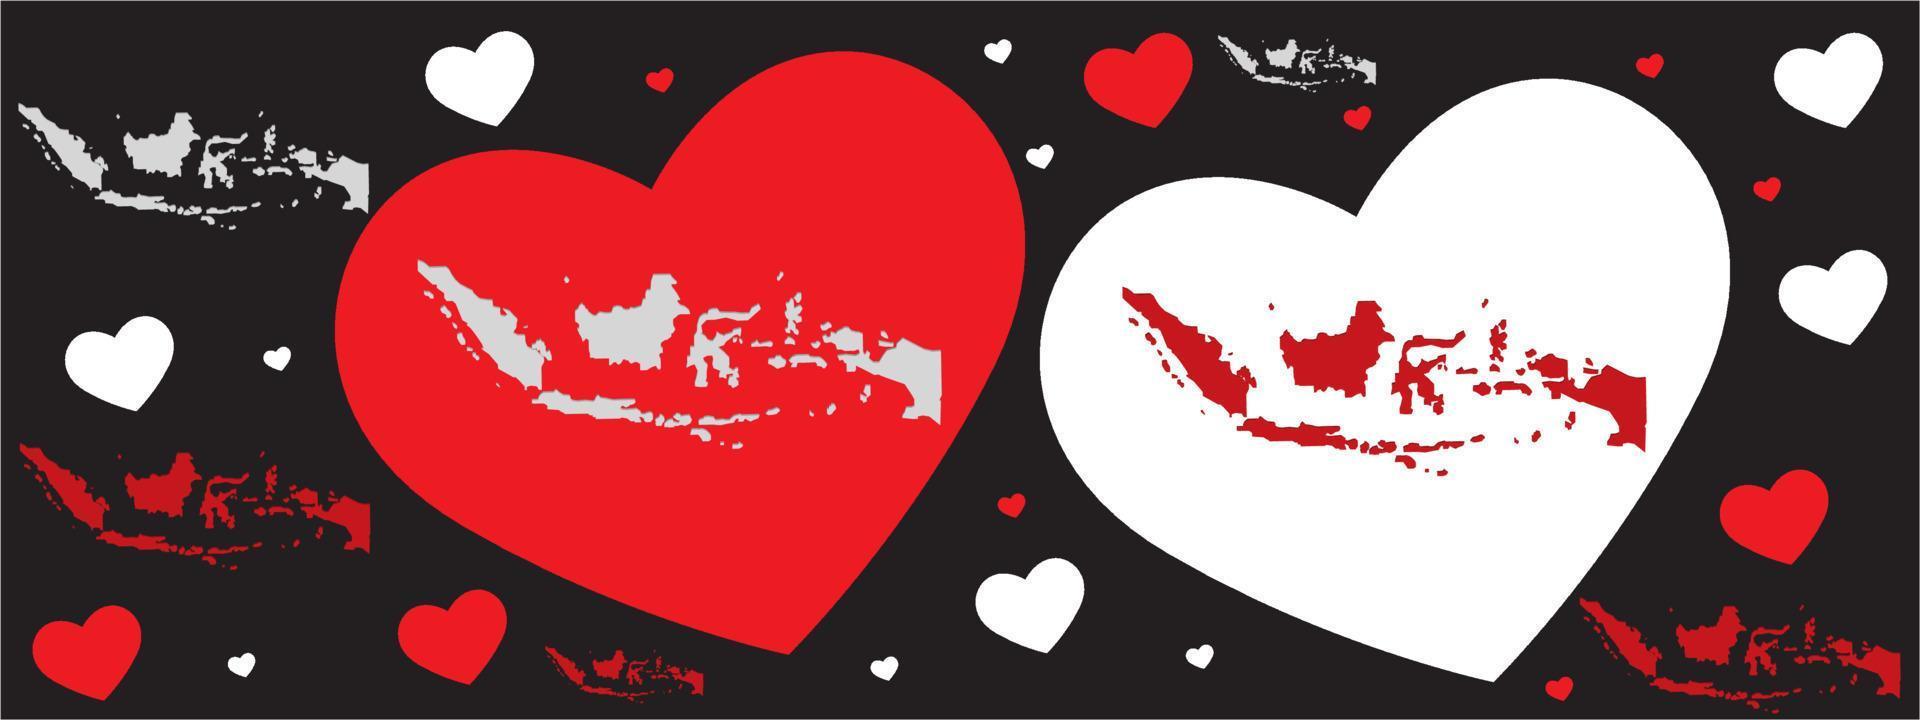 Indonesia map background with heart icon on independence day. vector